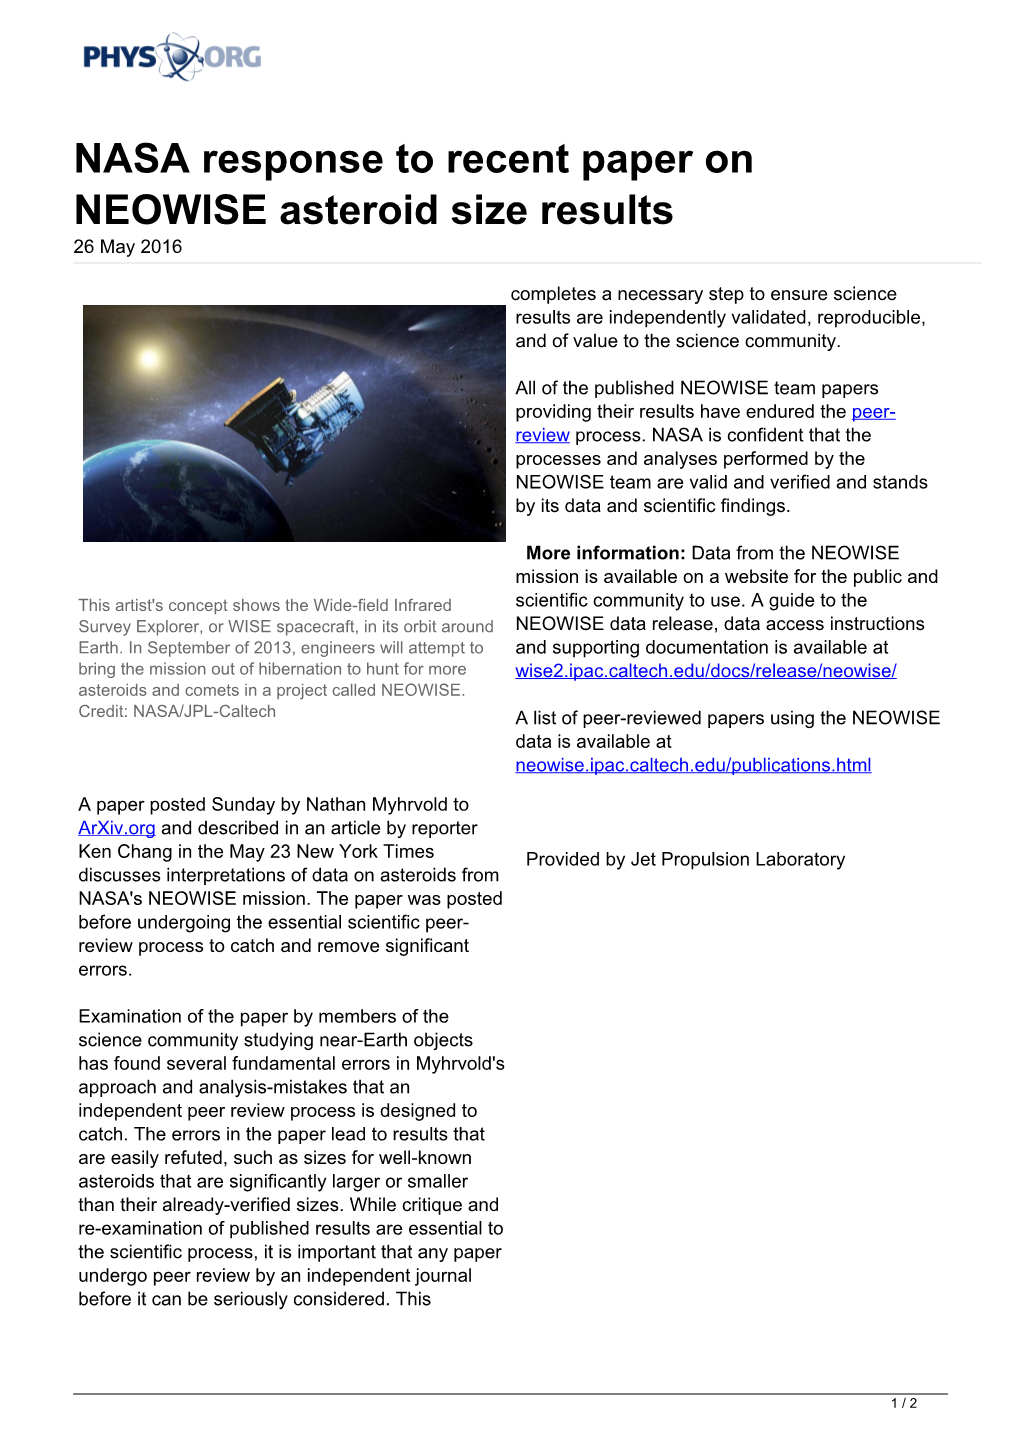 NASA Response to Recent Paper on NEOWISE Asteroid Size Results 26 May 2016